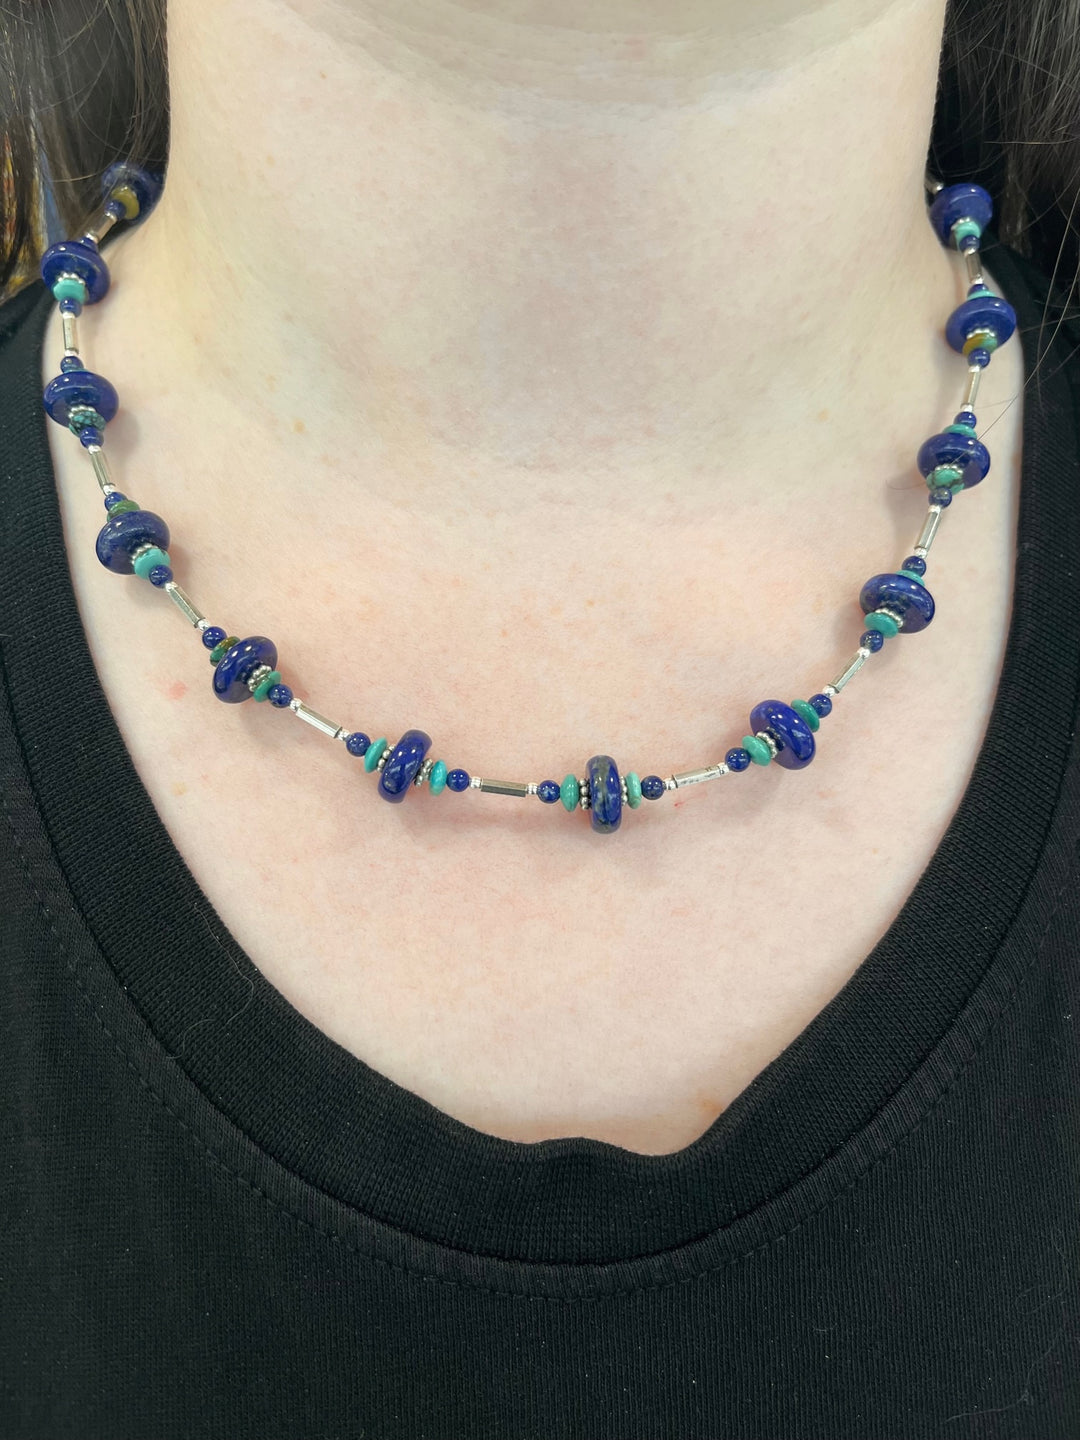 Lapis lazuli, turquoise and sterling silver necklace